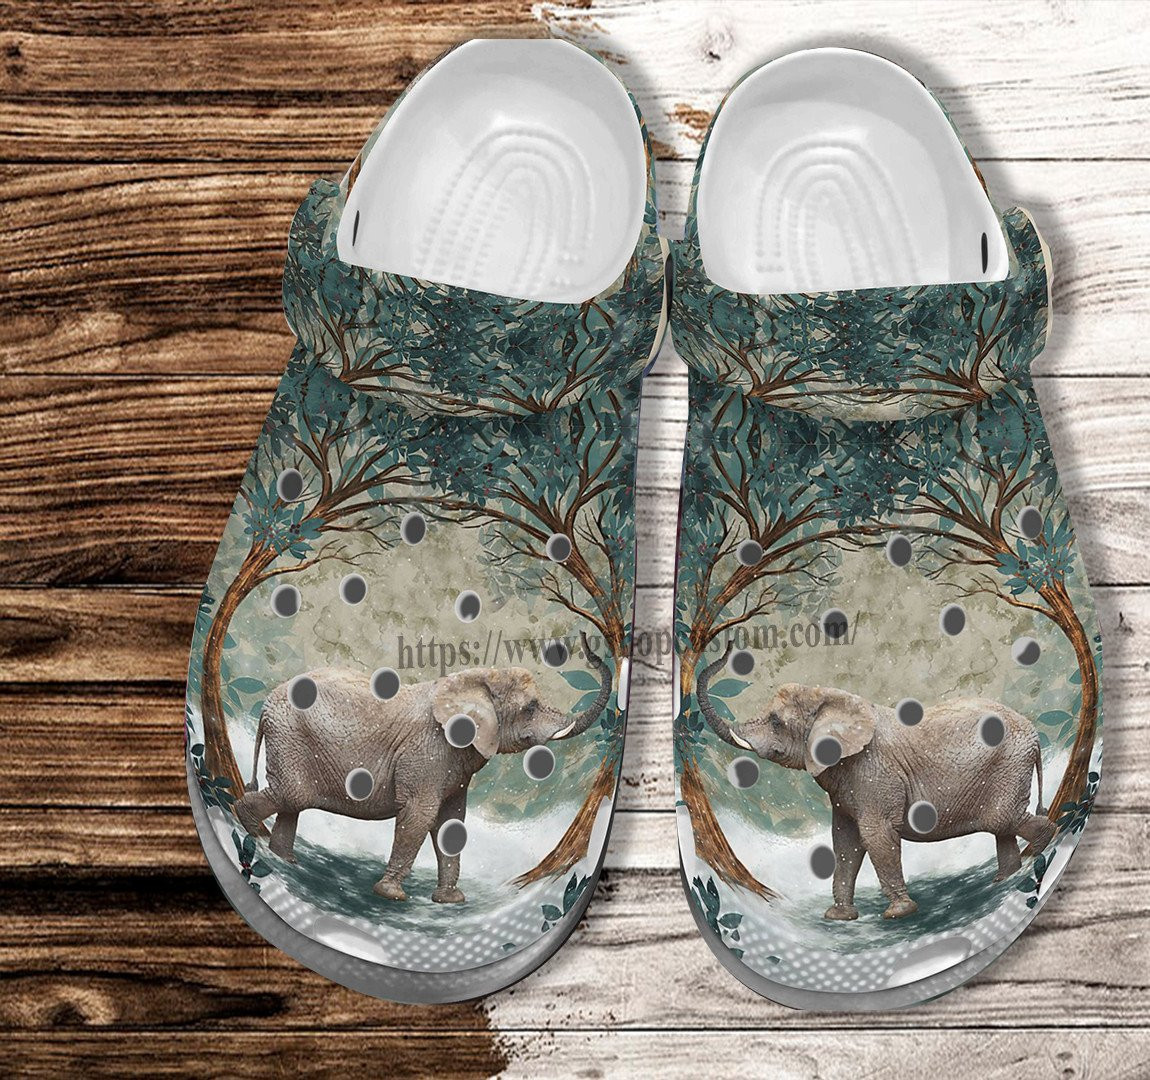 Elephant Jungle Tree Crocs Shoes For Men Women - Elephant Lover Croc Clogs Shoes Gift Mother Day 2022